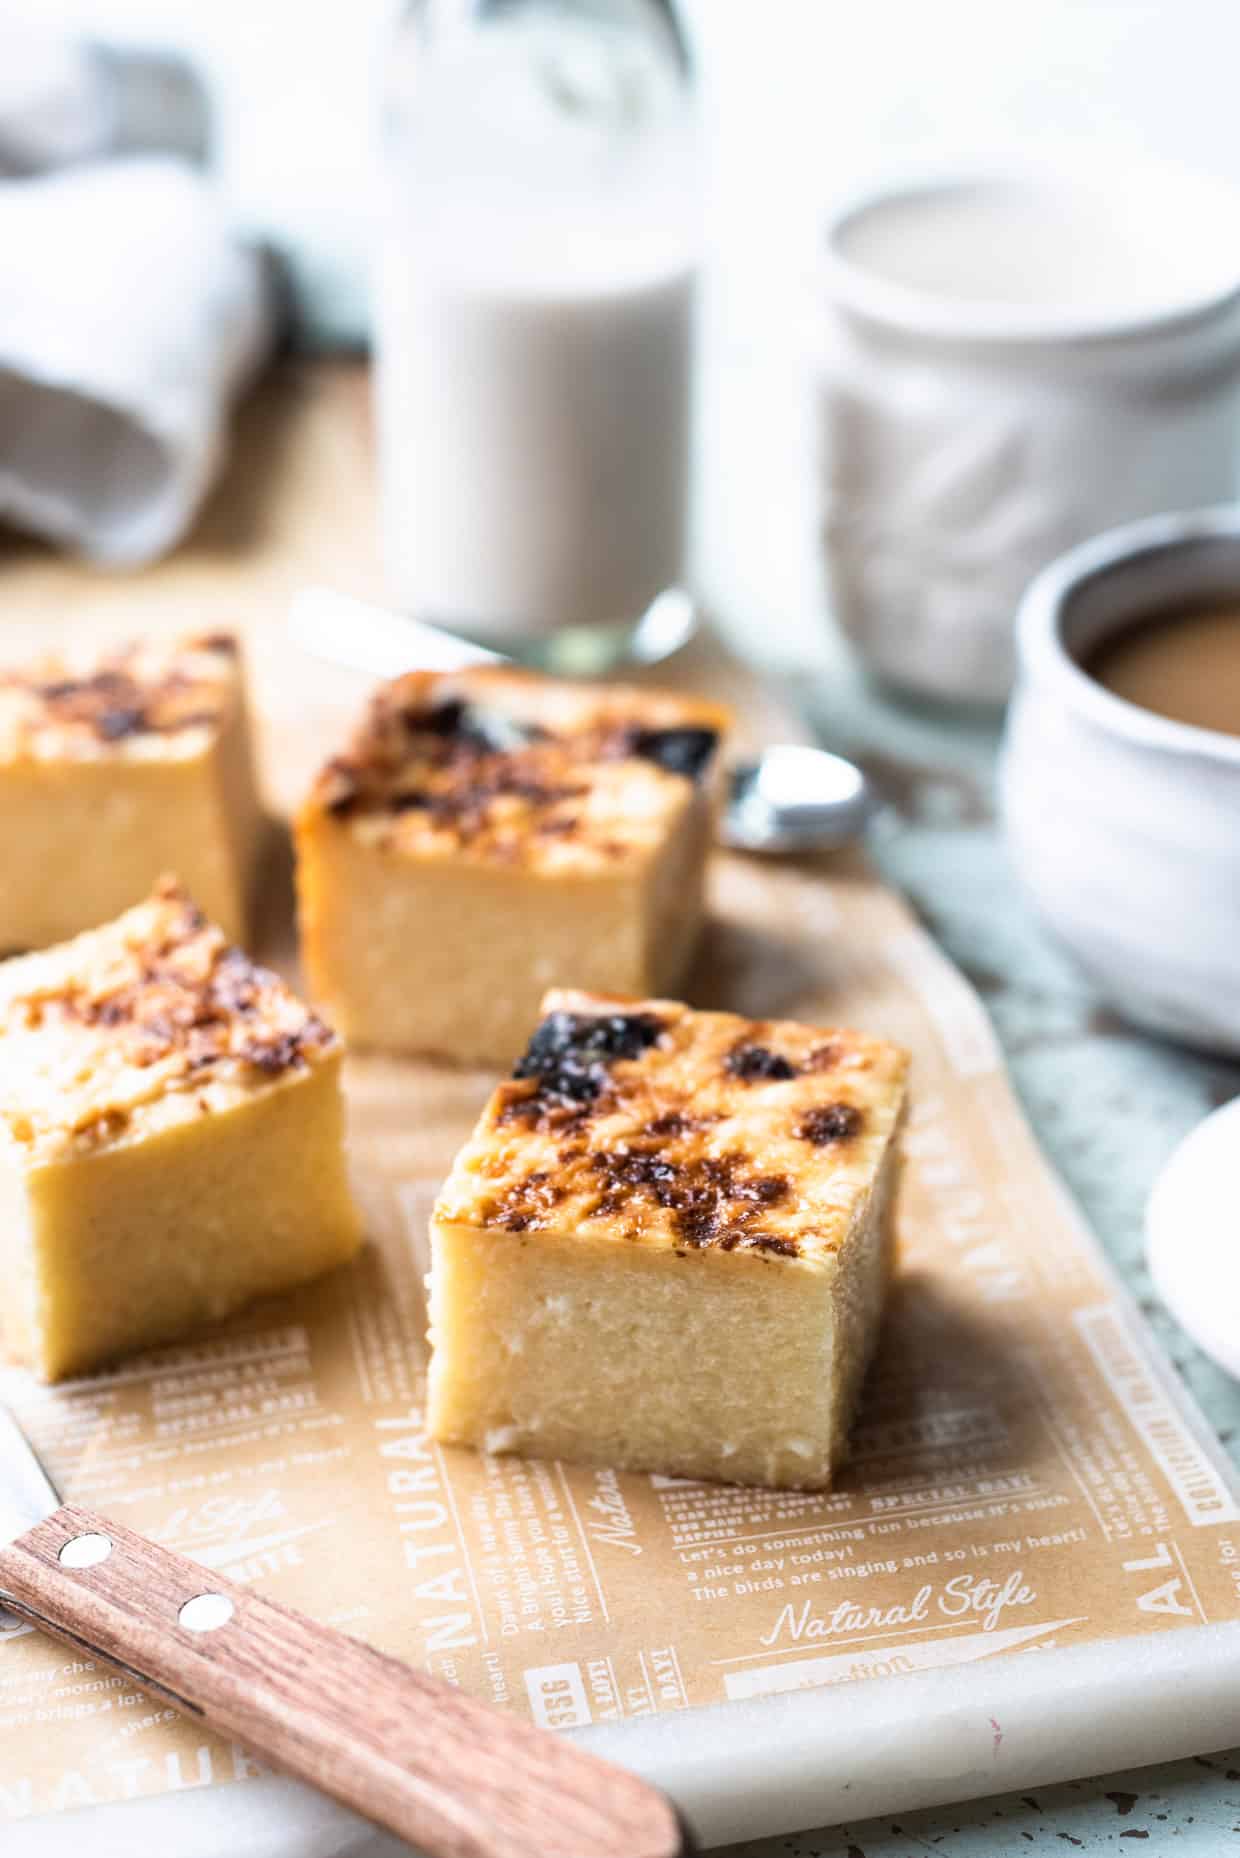 Slices of Cassava Cake on a board with coffee in the background.